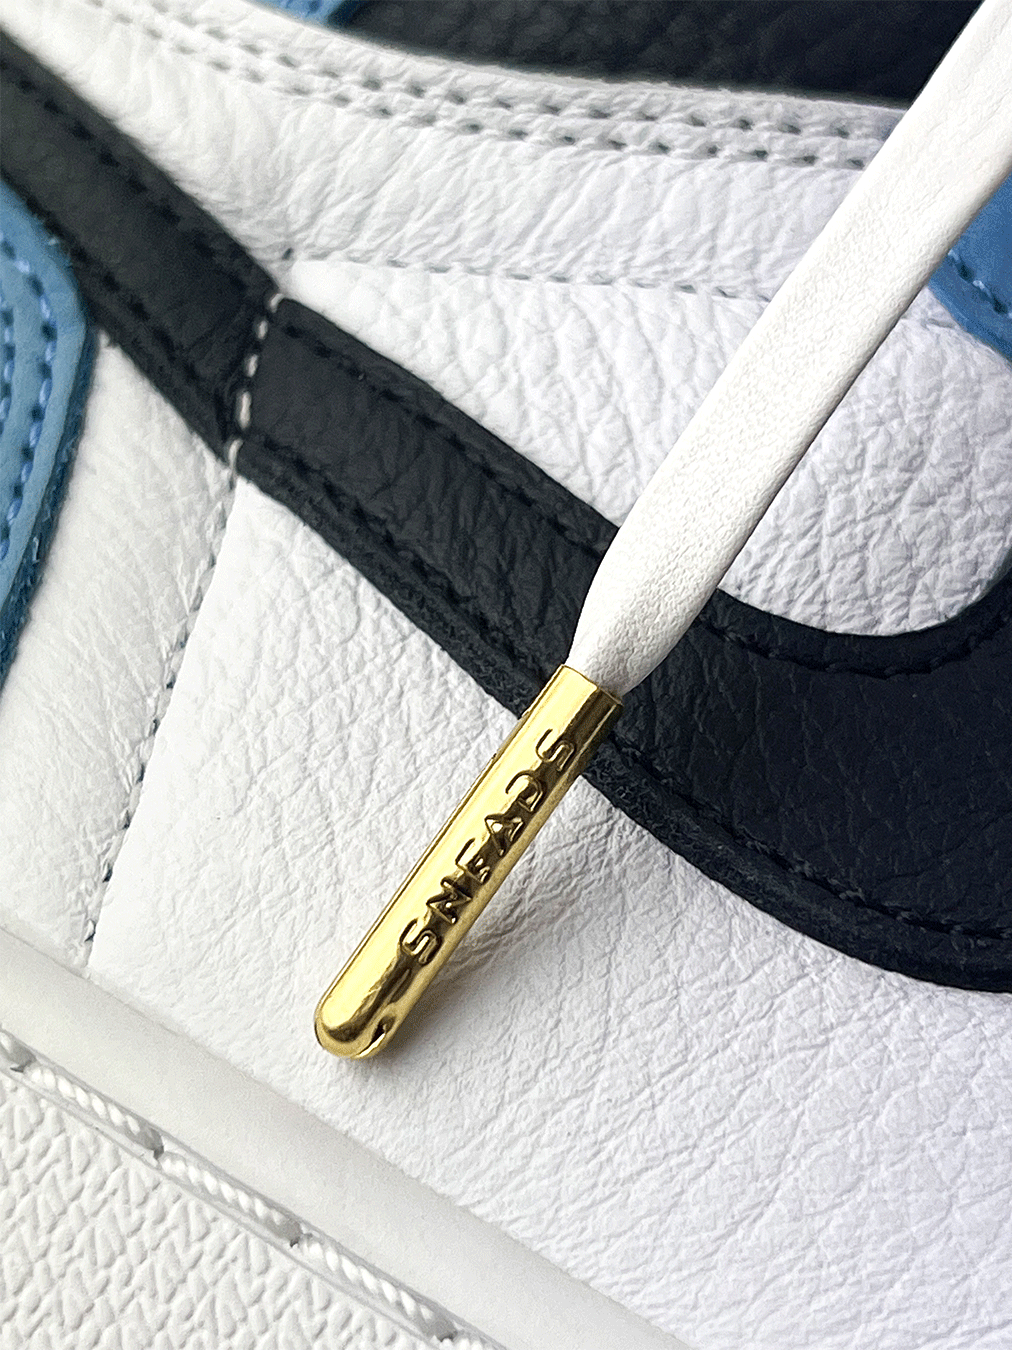 Sneads-leather-laces-_0003_White-leather-lace-aj1.png__PID:1c6ddfa9-a0c3-4222-830d-e66e6f96c6f8